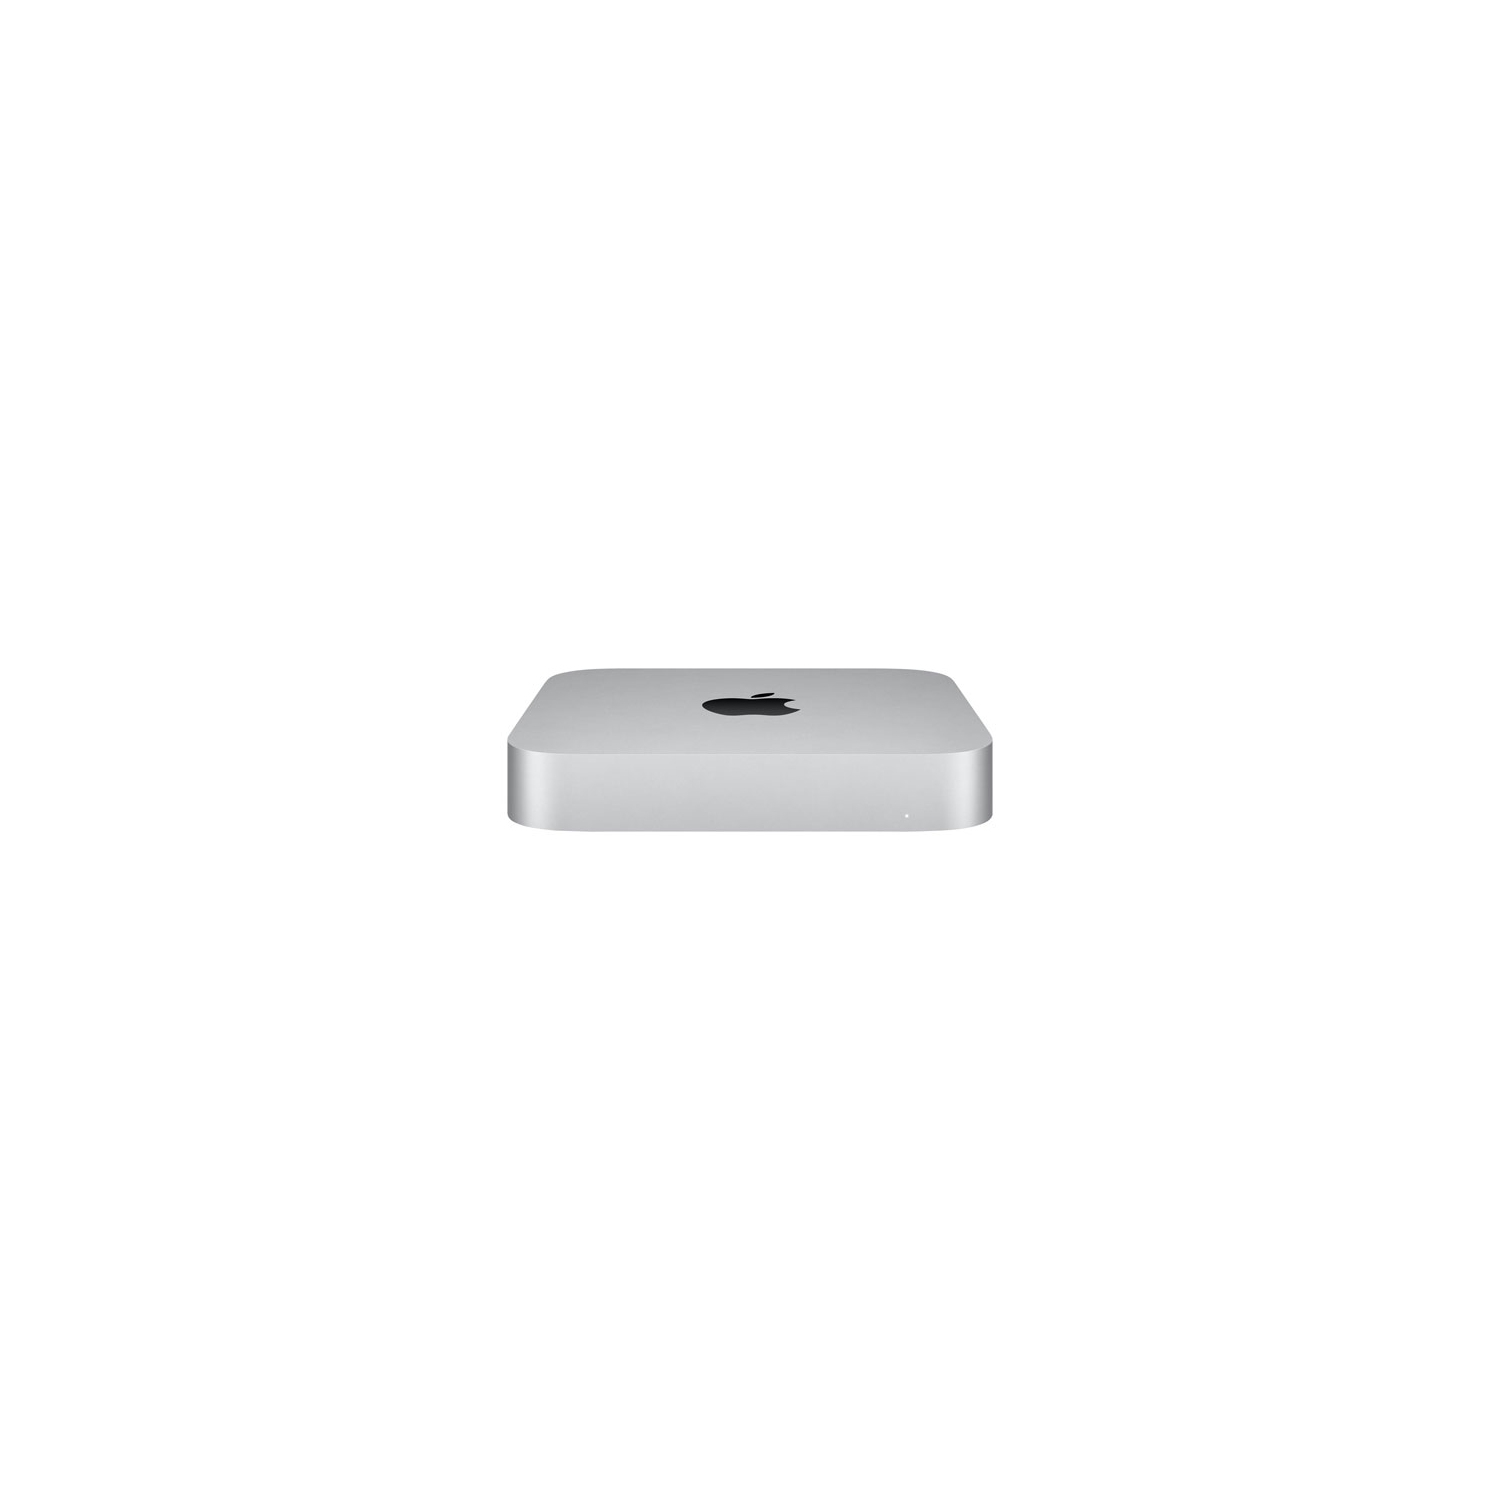 Mac Mini M1 - Where to Buy it at the Best Price in Canada?